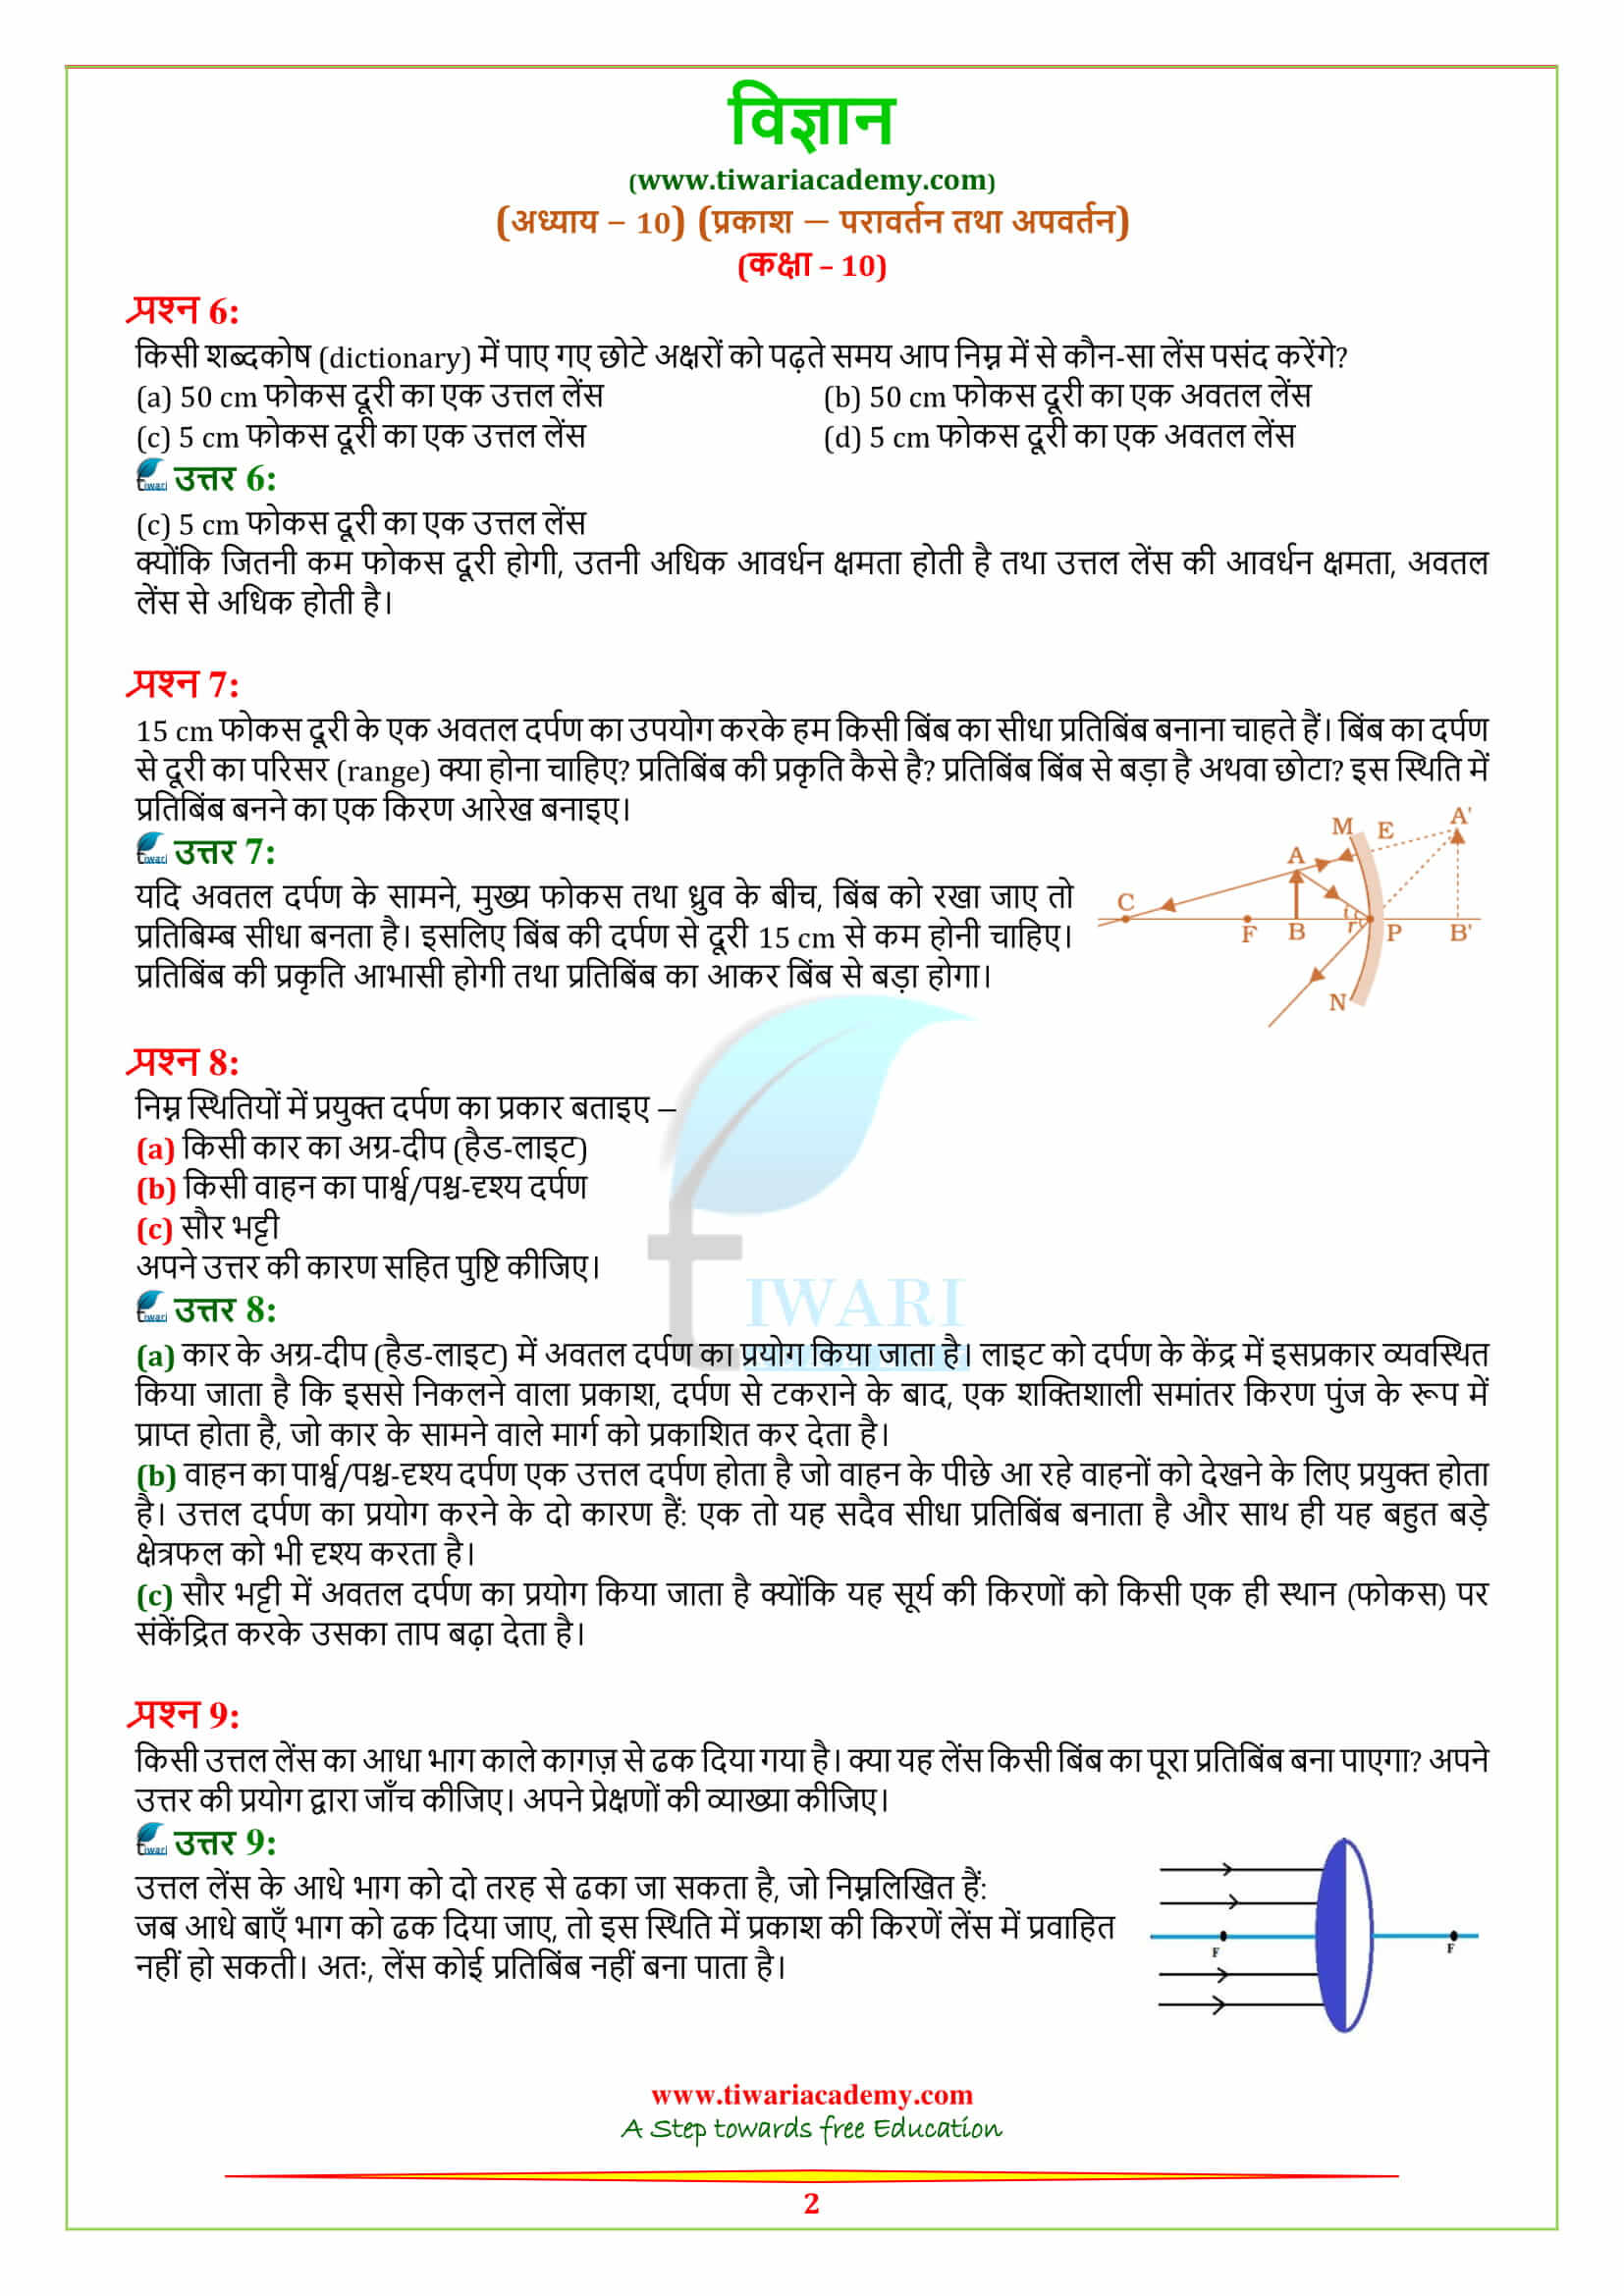 NCERT Solutions for Class 10 Science Chapter 10 Light – Reflection and Refraction in hindi medium